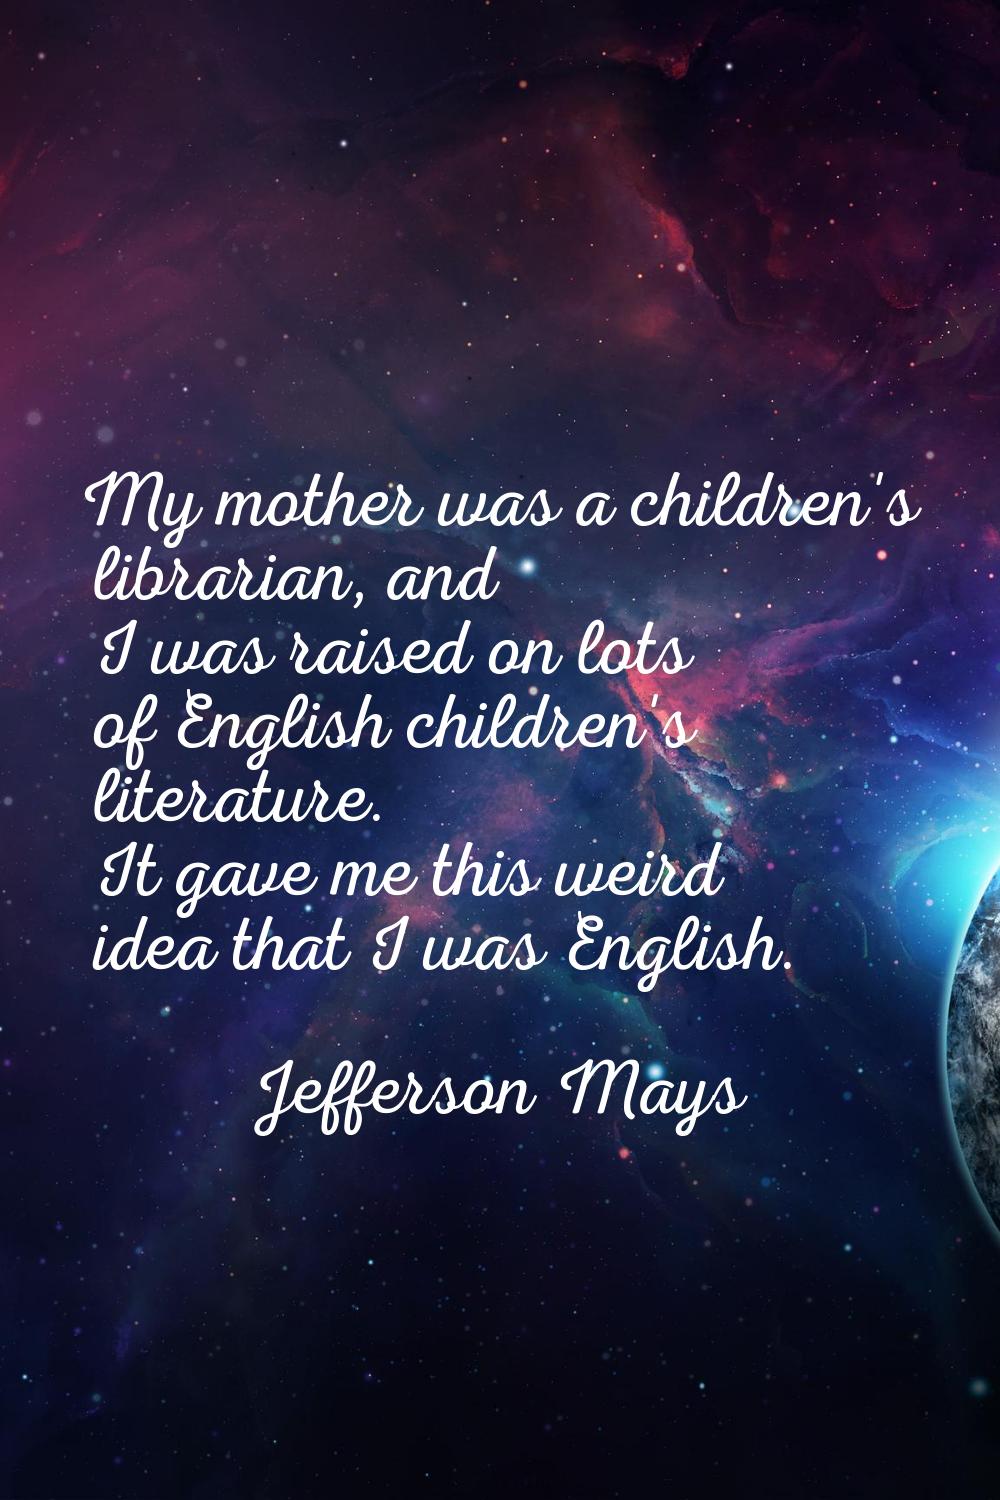 My mother was a children's librarian, and I was raised on lots of English children's literature. It